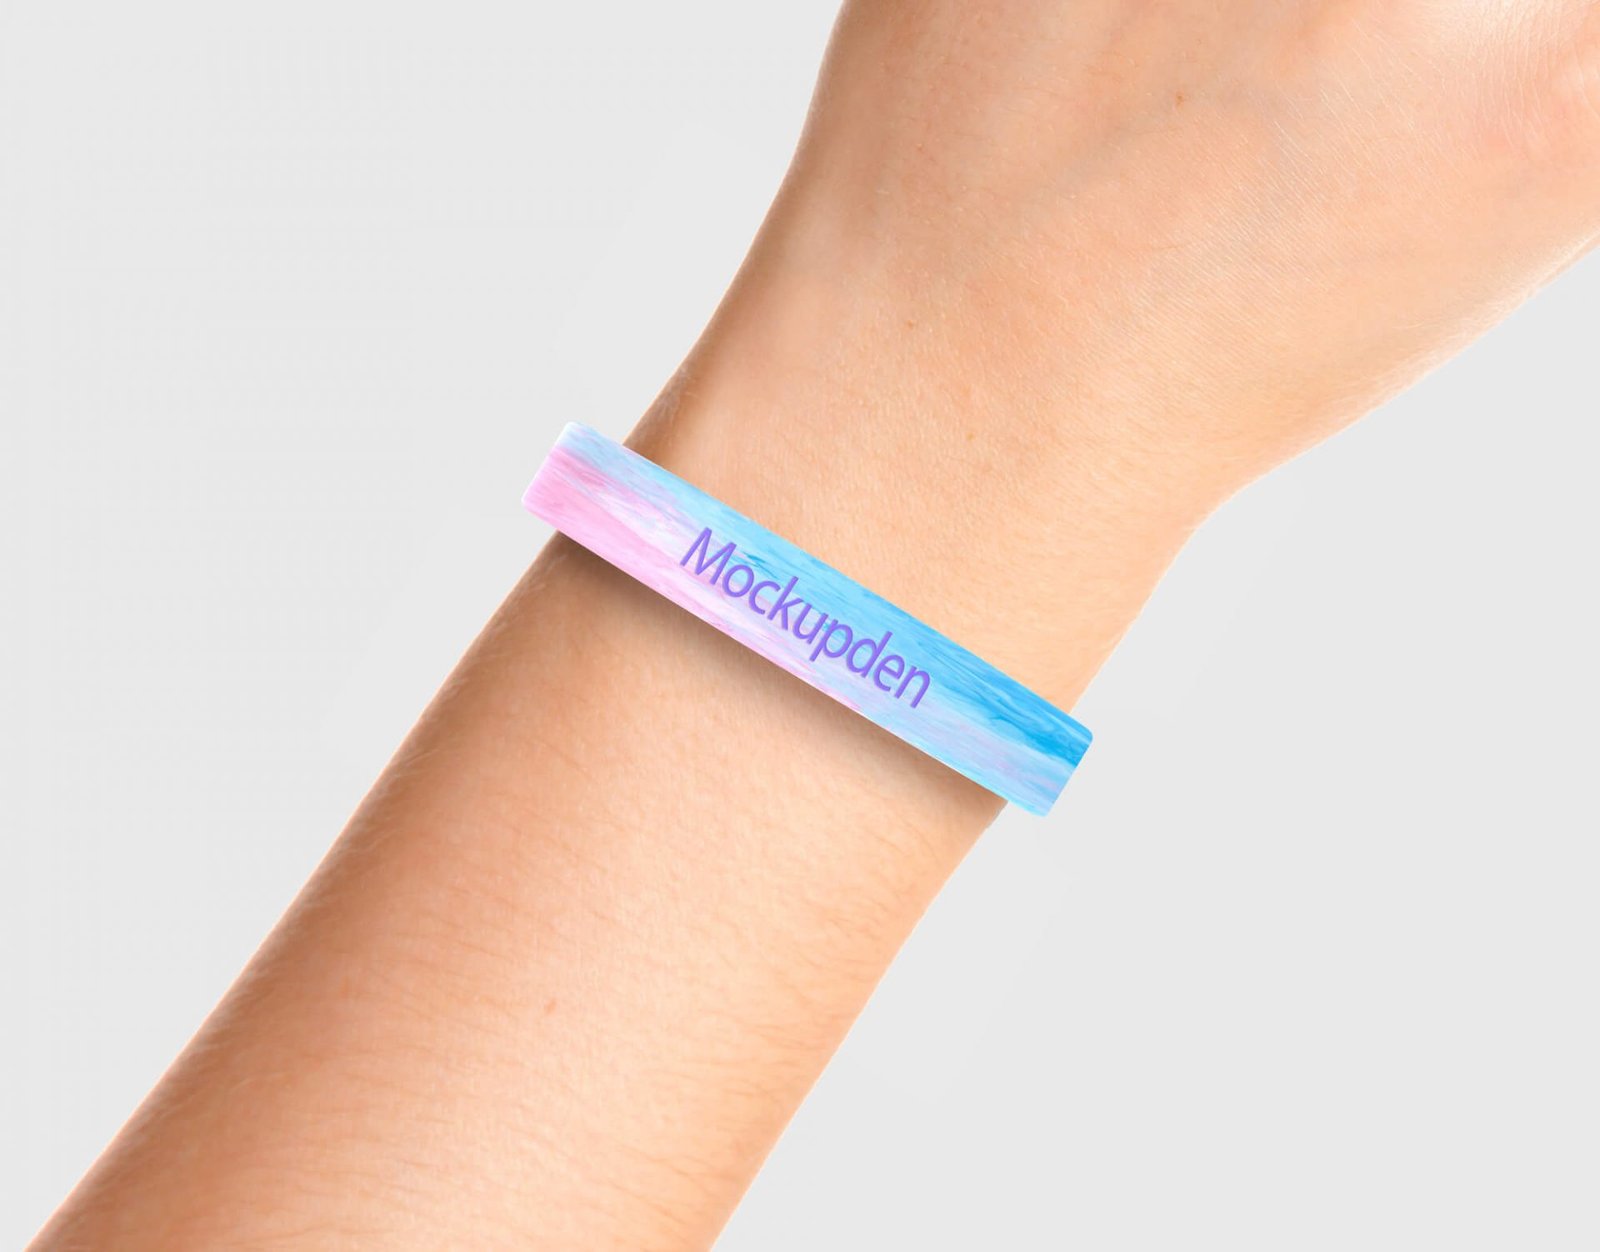 Download 16 + Wristband Mockup | 1Fabric, Paper, Silicone, rubber Wristband PSD